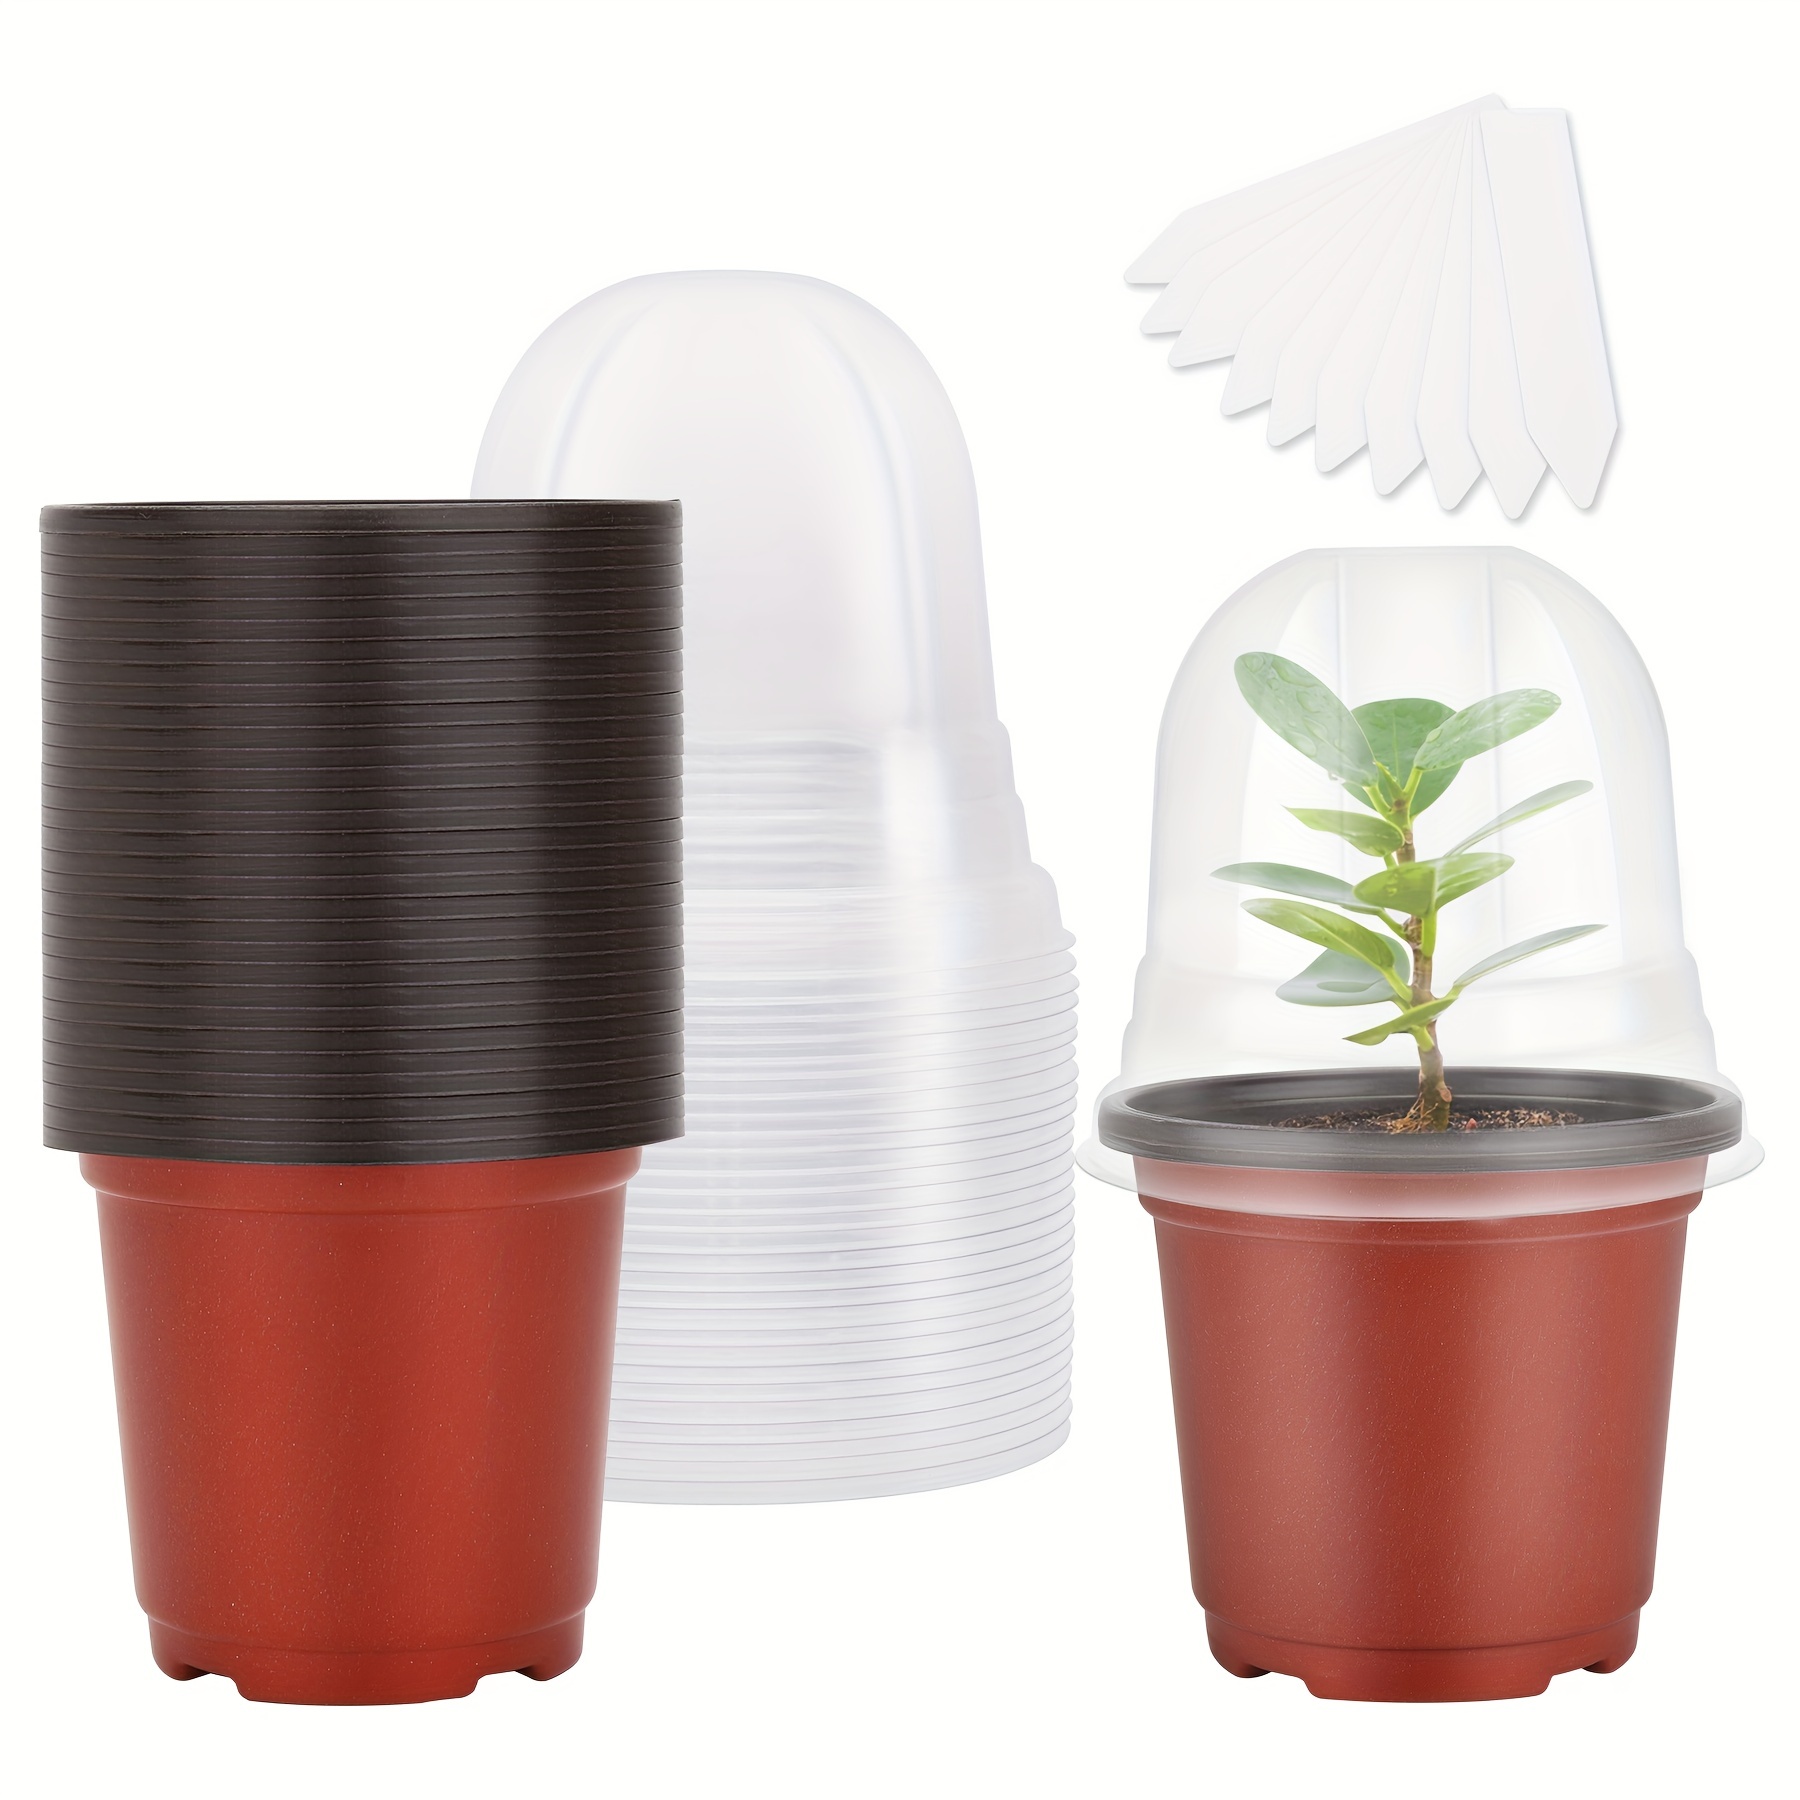 

20/30/40pcs/set Plant Nursery Pots With Humidity Dome 4" Soft Transparent Plastic Gardening Pot Planting Containers Cups Planter Small Starter Seed Starting Trays For Seedling With 10pcs Plant Labels